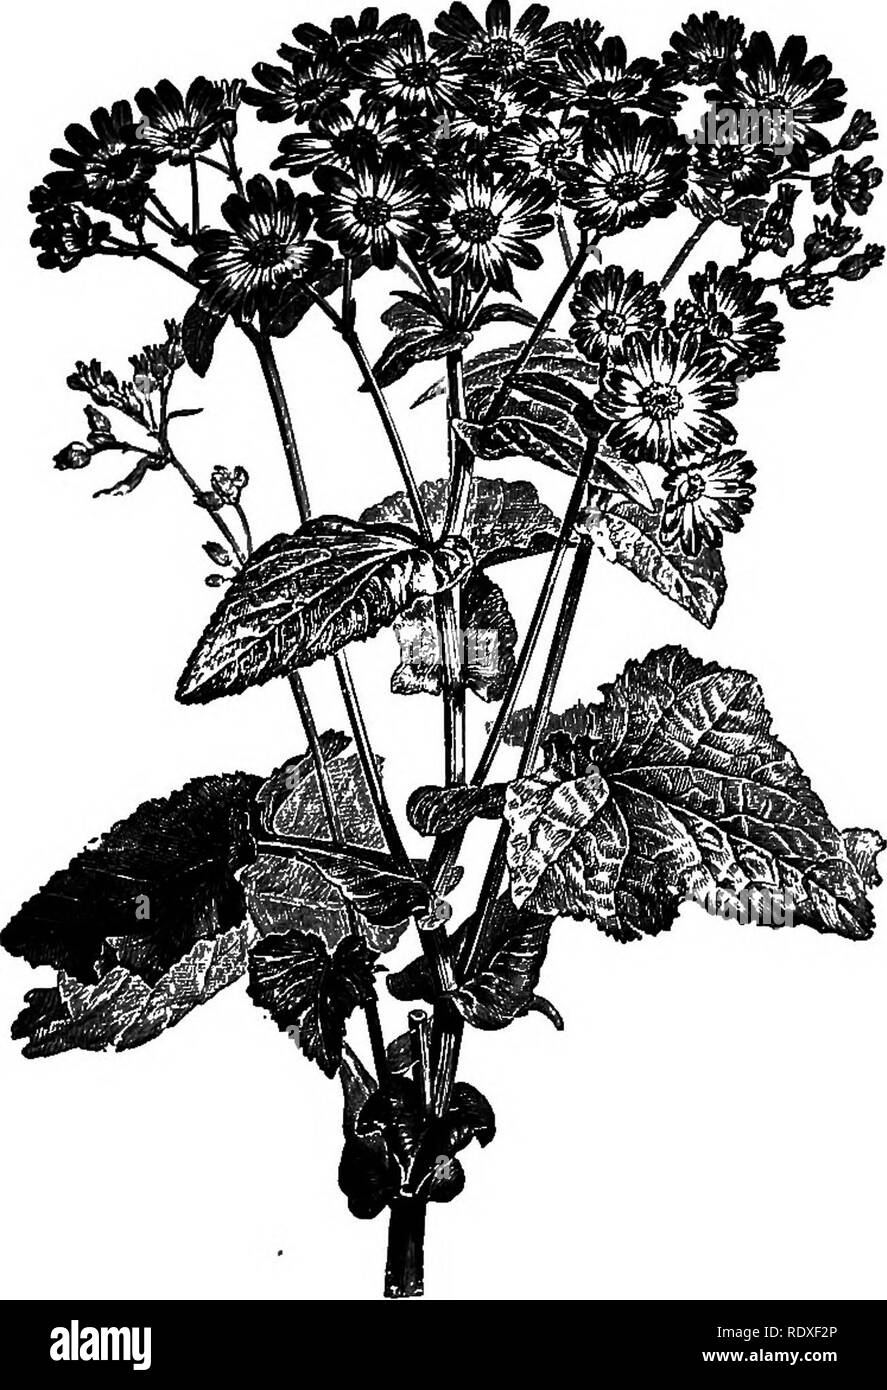 . The Book of gardening; a handbook of horticulture. Gardening; Horticulture. 712 THE BOOK OF GARDENING. Cinerarias.—These are showy and extremely useful plants (Fig. 460), but, like Calceolarias, are rather difficult to bring to perfection. Sow seed in pans filled with very light sandy soil, in May for winter, and in July for spring-flowering; place in a cool frame, shading well and keeping close till the seed- lings are well up. Pot singly into 3m. pots, keeping in the frame, giving plenty of room, and continue to shift as required. In the middle of September remove* to the cool pit, transfe Stock Photo